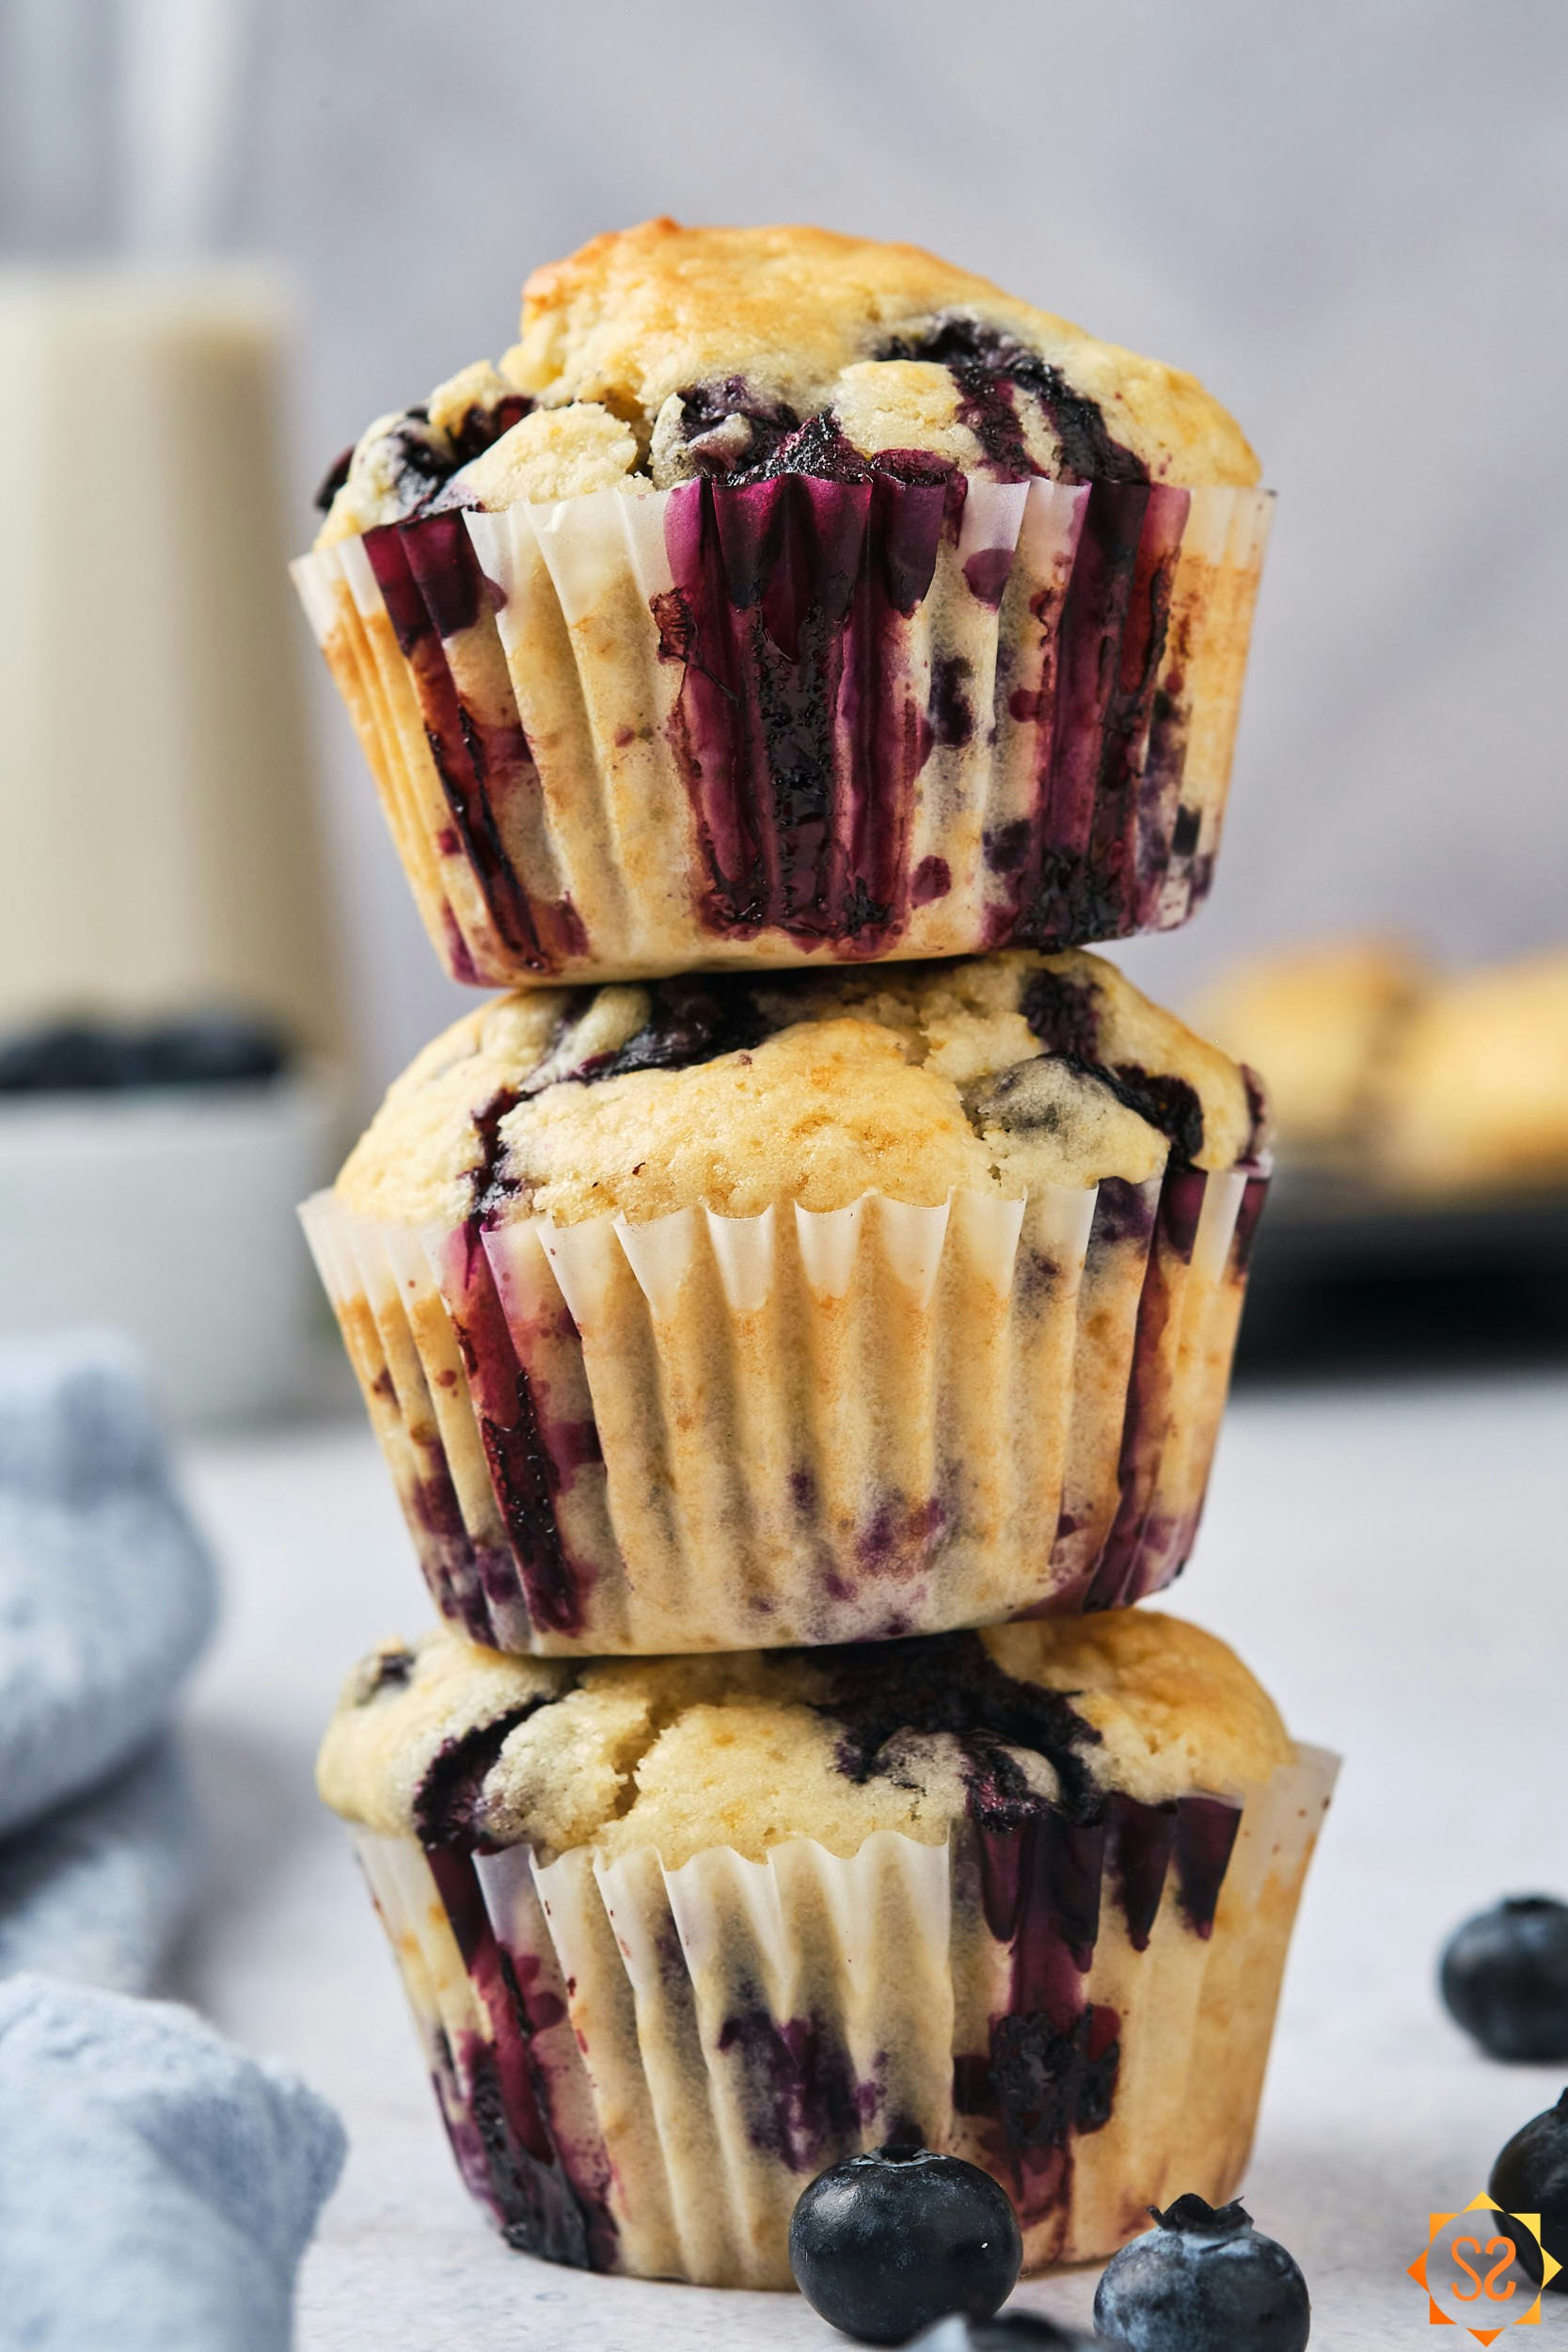 Three vegan blueberry muffins stacked on top of each other, with almond milk and more muffins in the background.